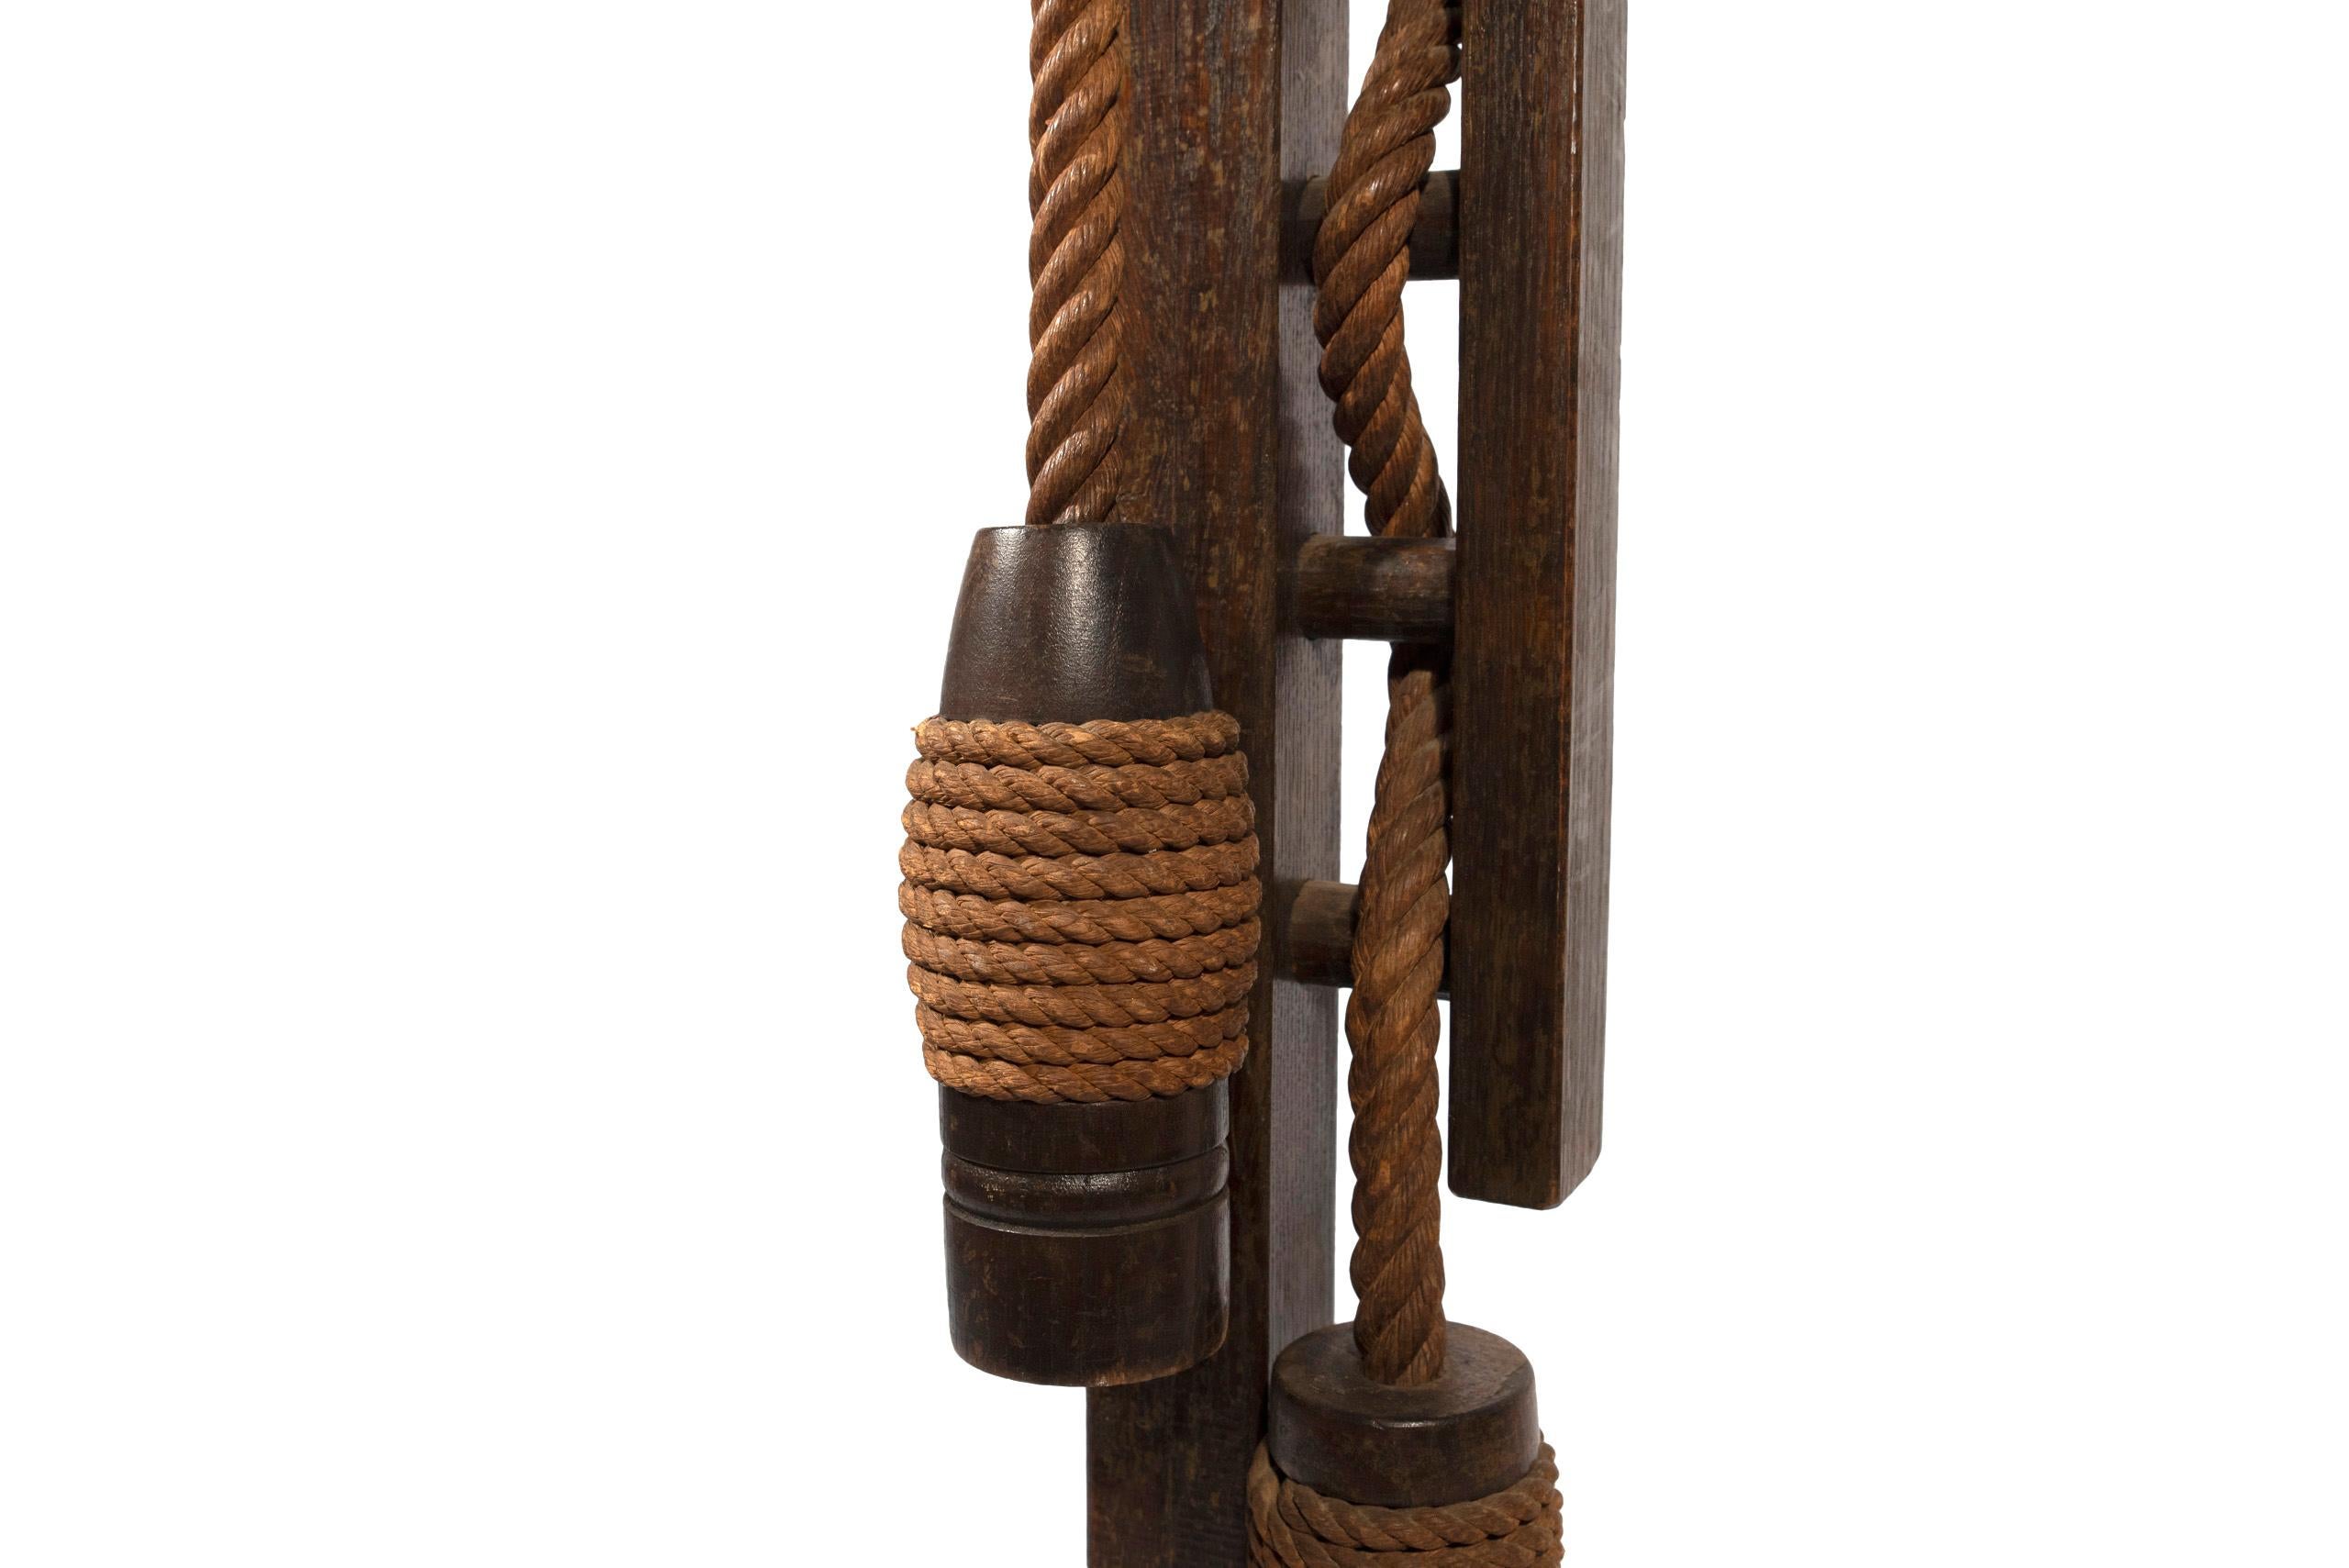 Audoux-Minet,
Floor lamp,
Wood and rope,
circa 1950, France.
Measures: Height 178 cm, diameter 28 cm.